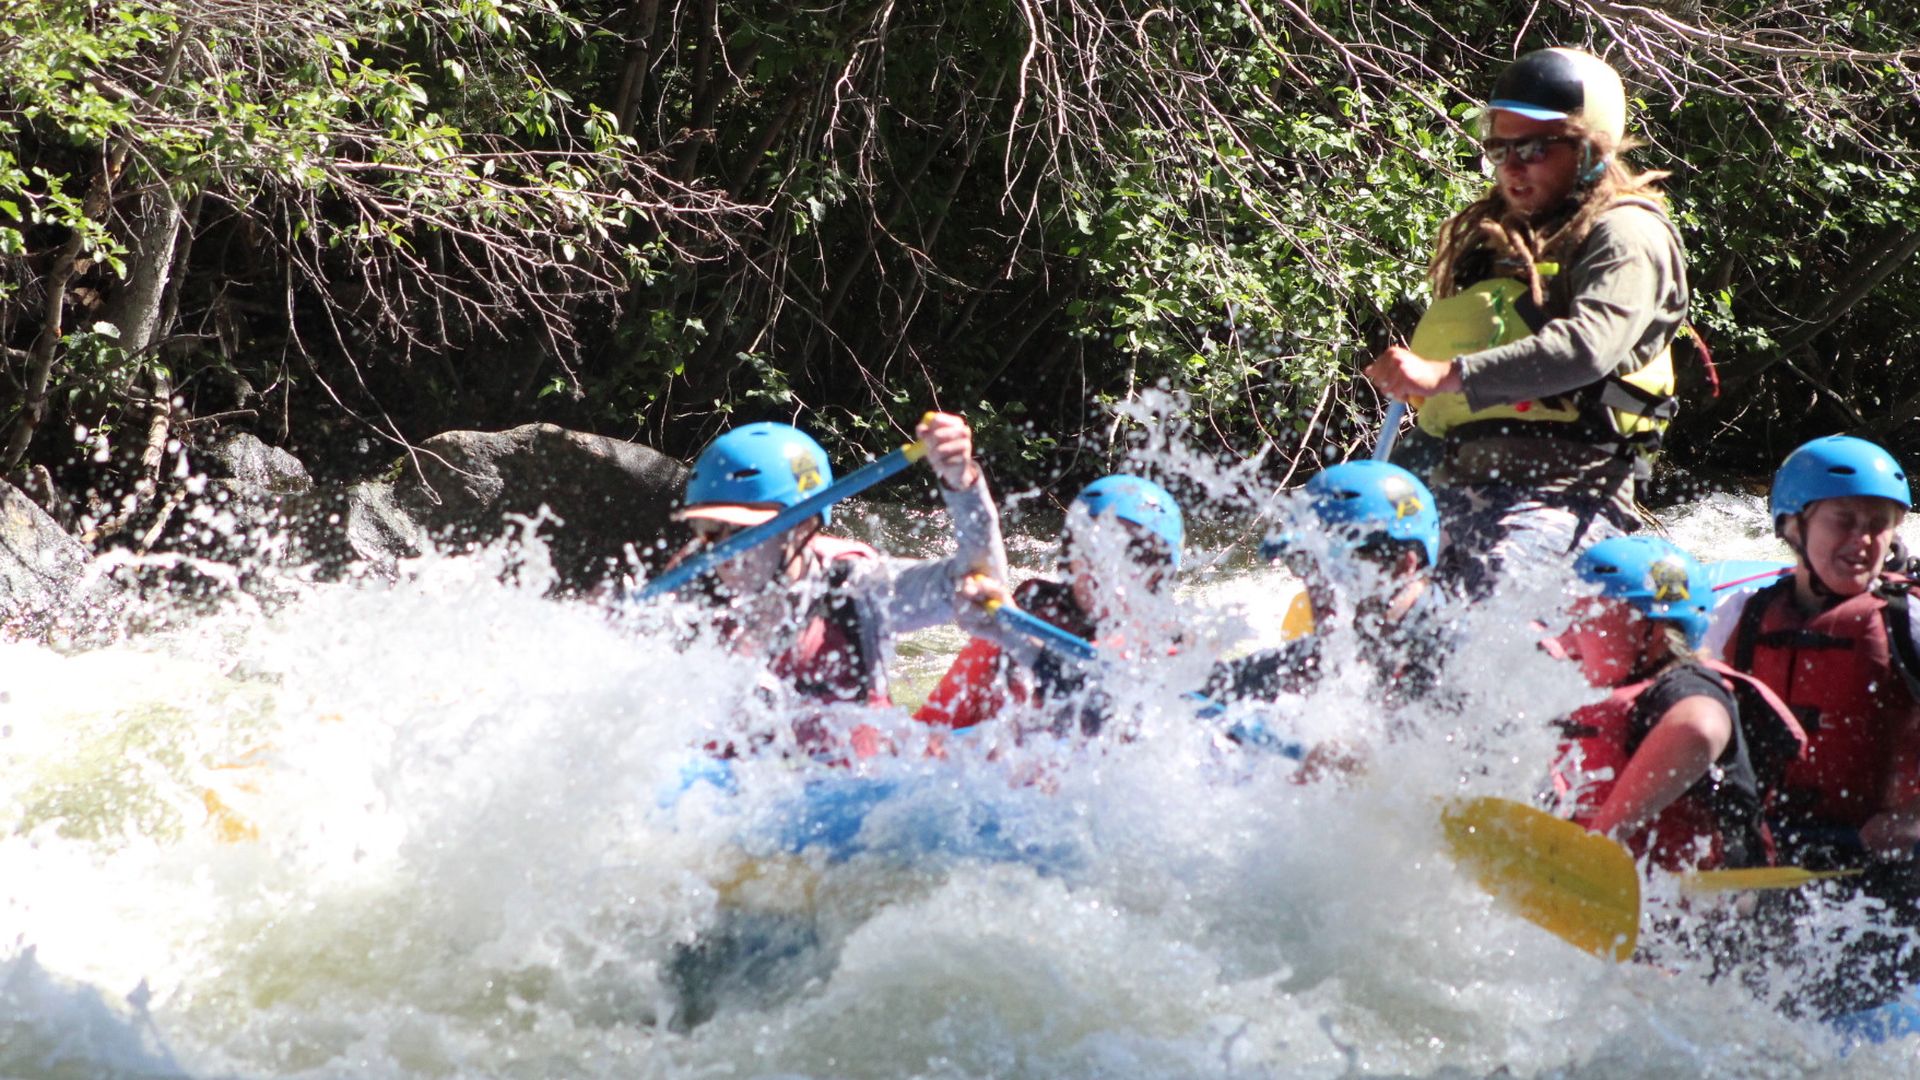  A rapid on the Taylor River swamps John, lower center, as guide Drea Hanks, upper center, steers the raft July 15. Photo courtesy of Whitewater Photography